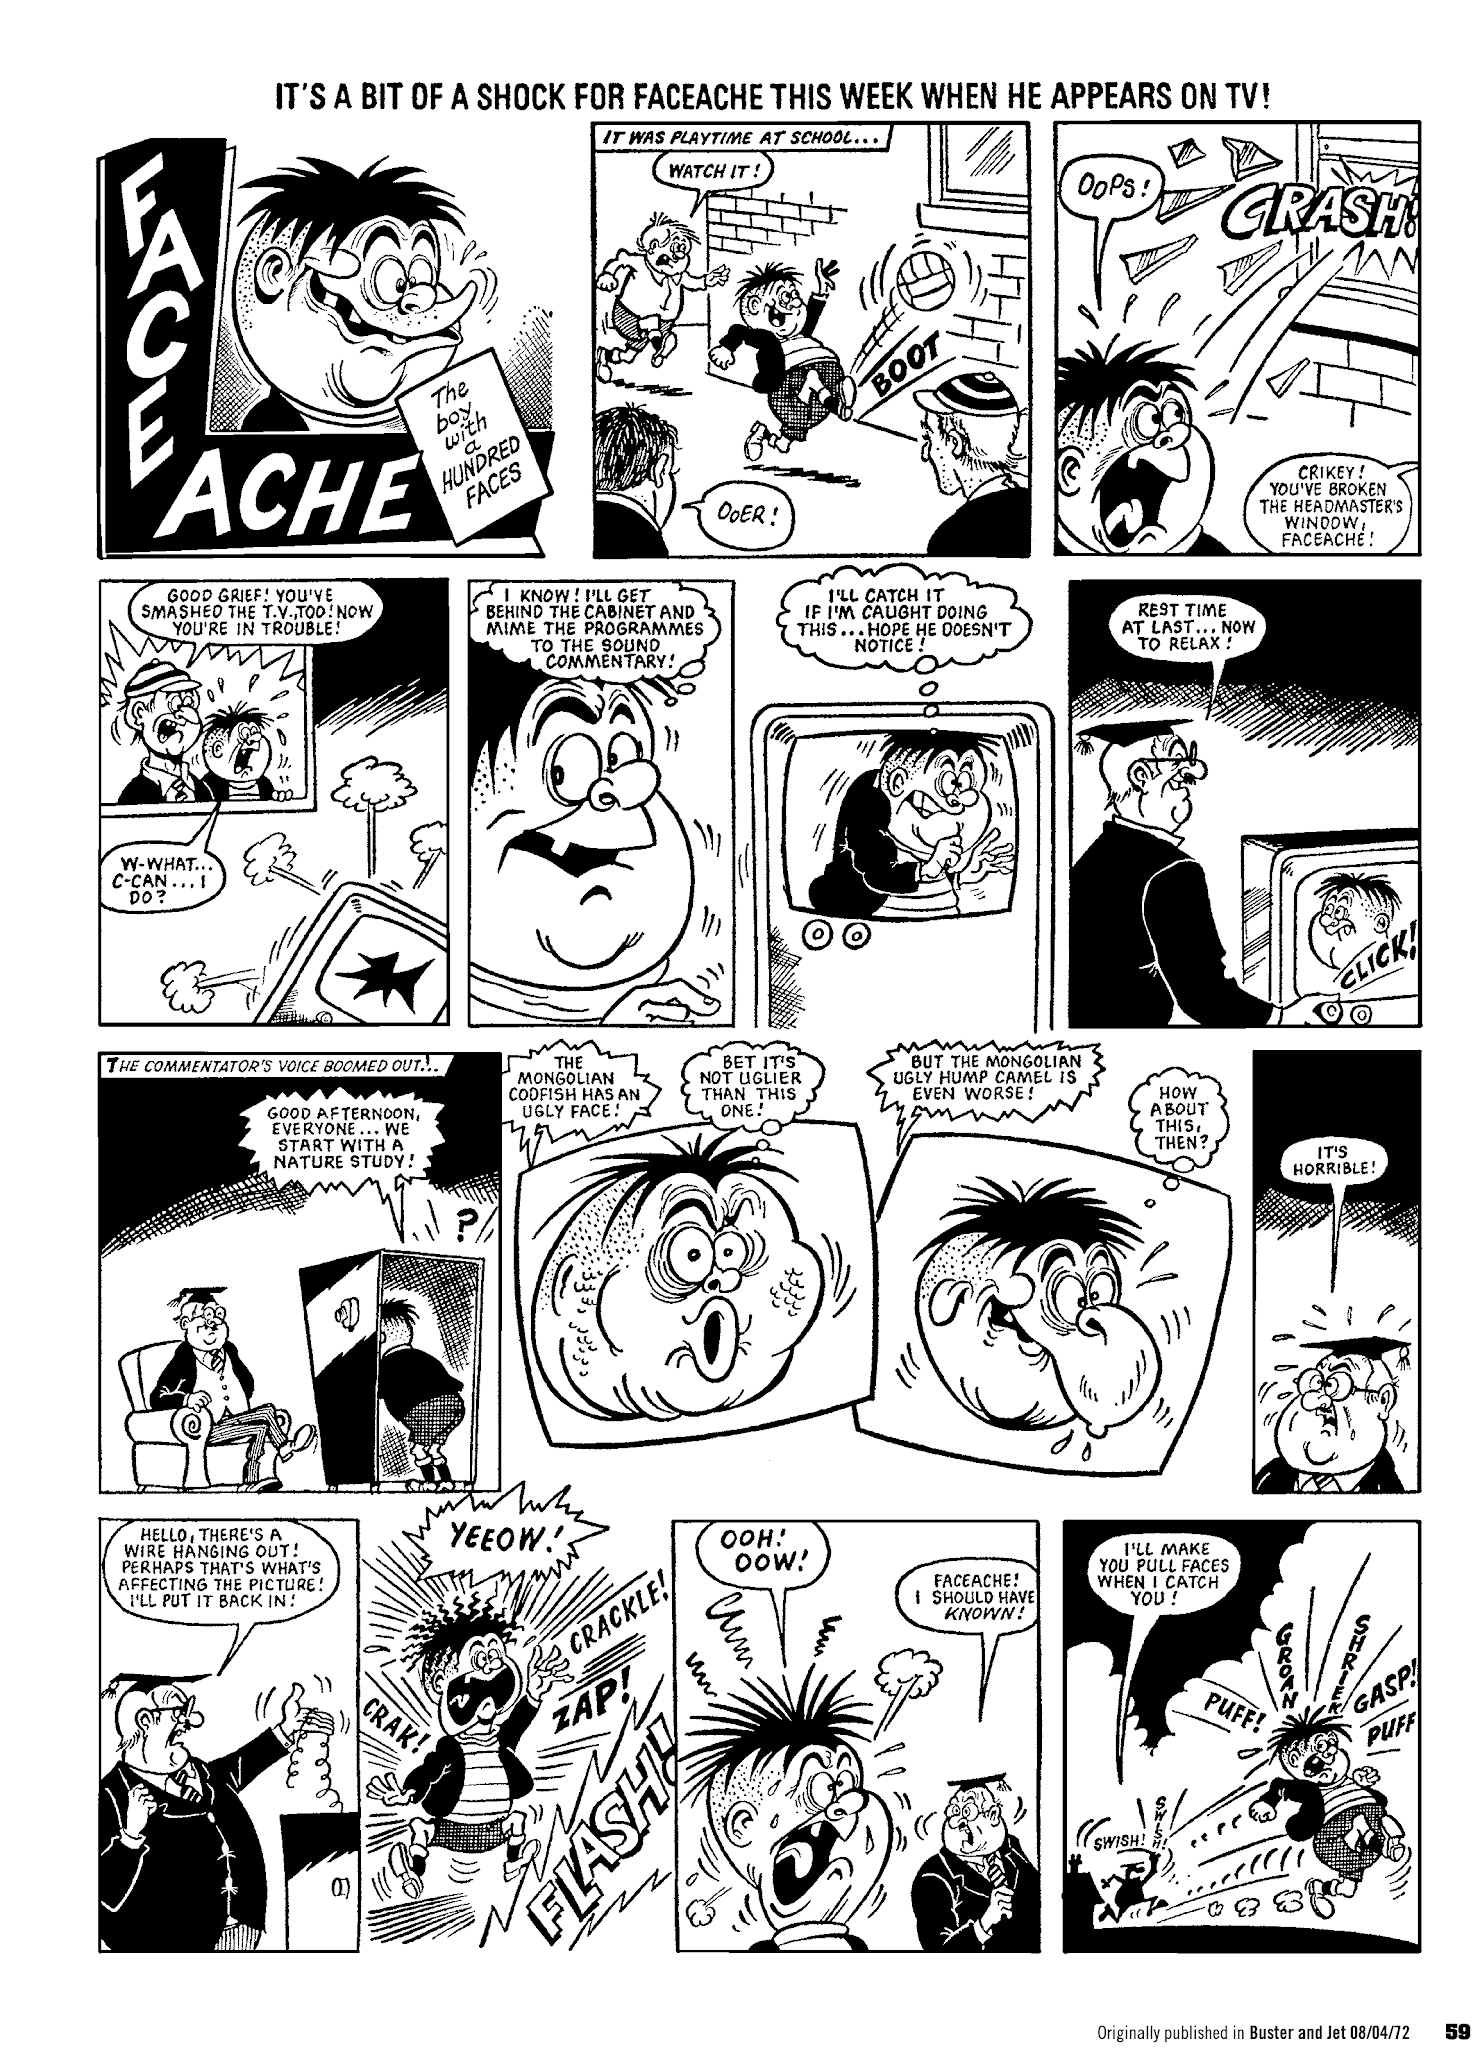 Read online Faceache: The First Hundred Scrunges comic -  Issue # TPB 1 - 61